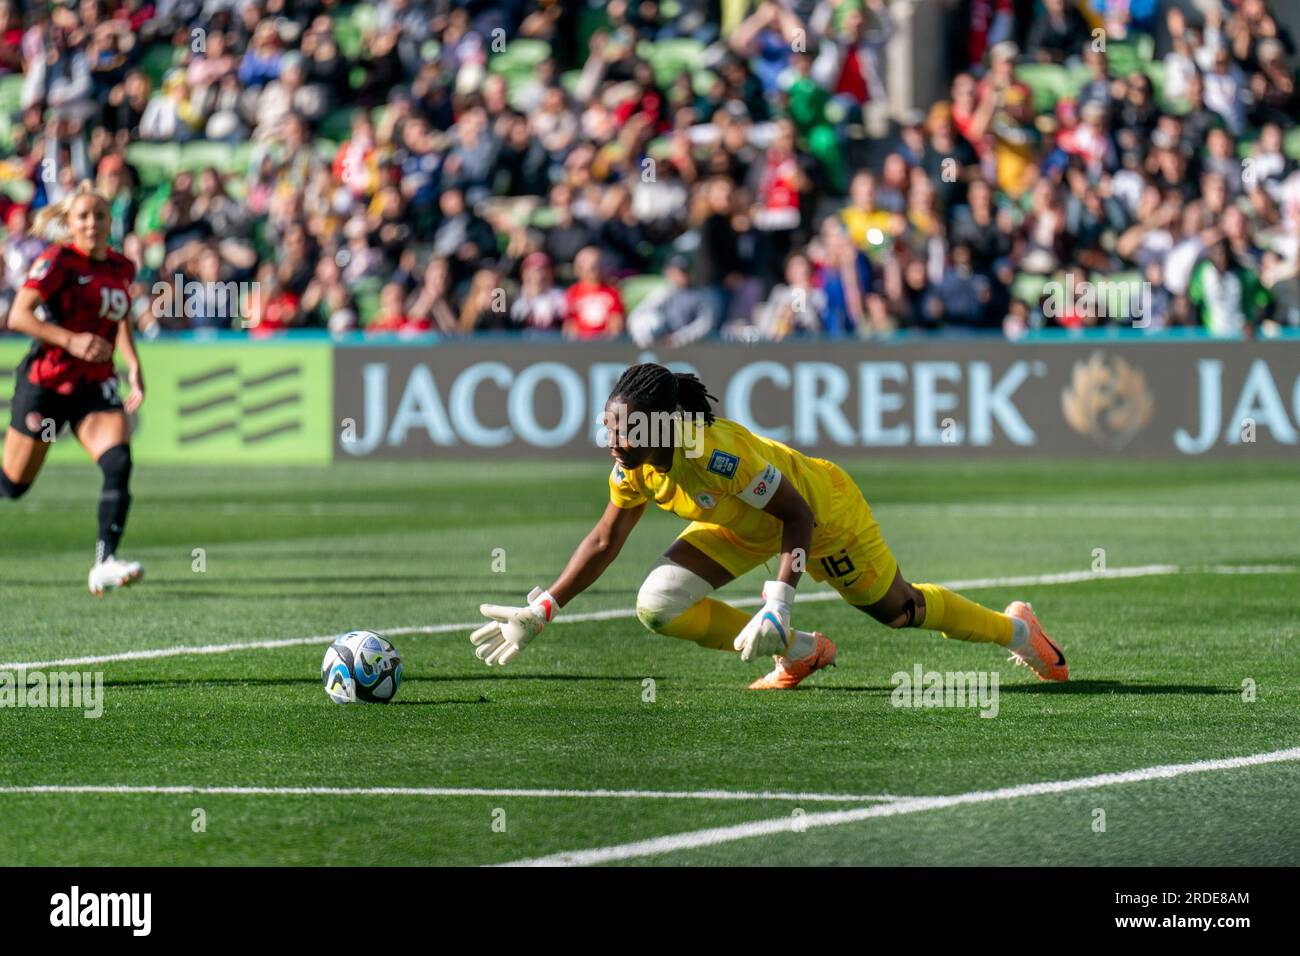 Melbourne, Australia. 21st July, 2023. Melbourne, Australia, July 21st 2023: Goalkeeper Chiamaka Nnadozie (16 Nigeria) saves a penalty during the 2023 FIFA Womens World Cup football match between Nigeria and Canada at Melbourne Rectangular Stadium in Melbourne, Australia. (Noe Llamas/SPP) Credit: SPP Sport Press Photo. /Alamy Live News Stock Photo